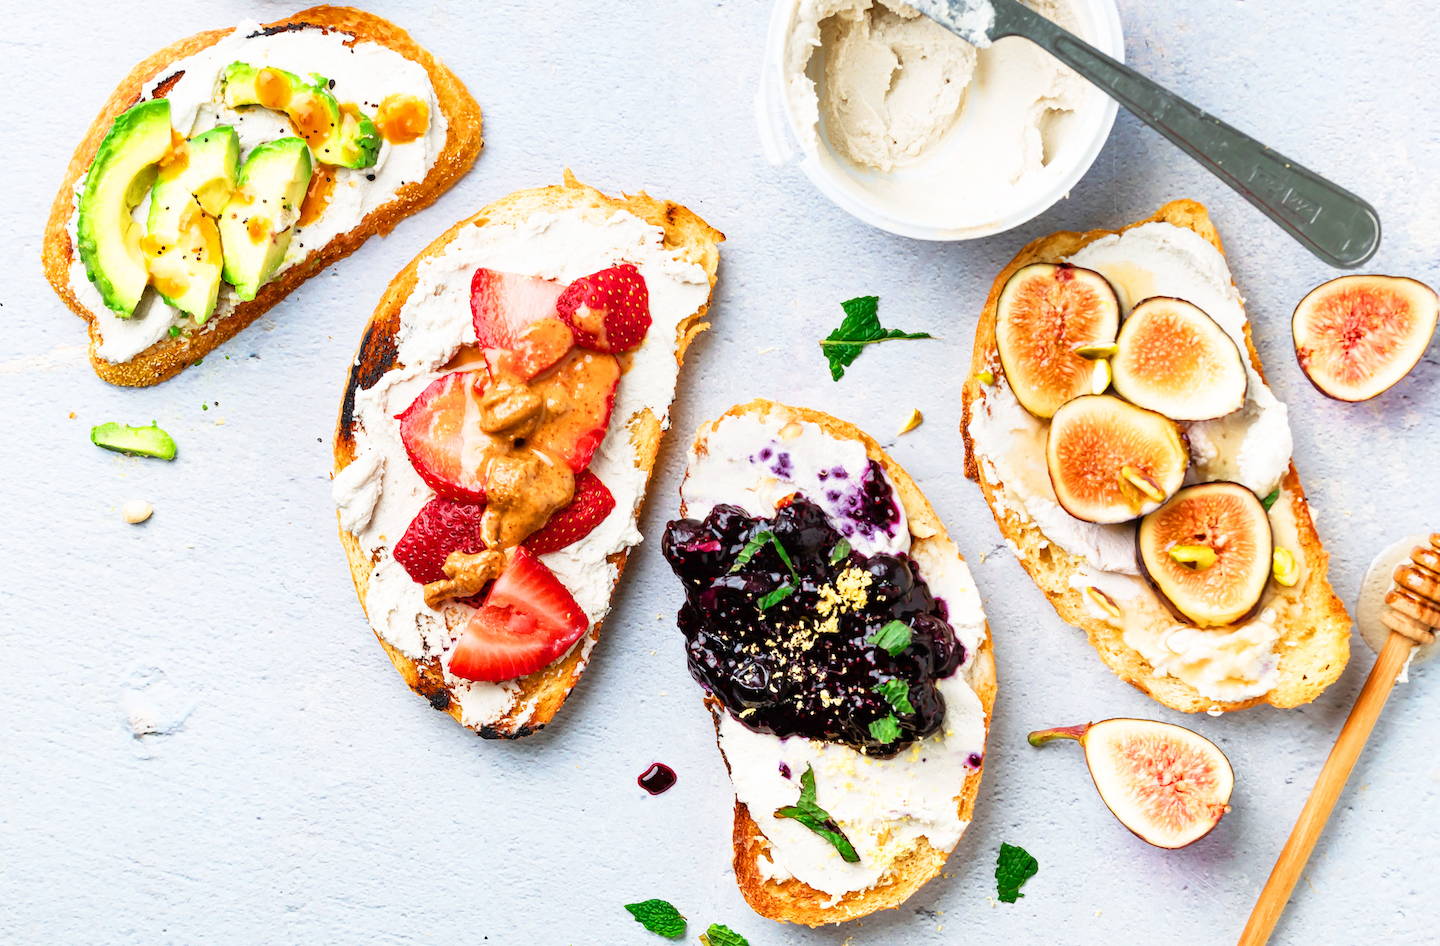 delicious toasts with Spero sunflower cream cheese